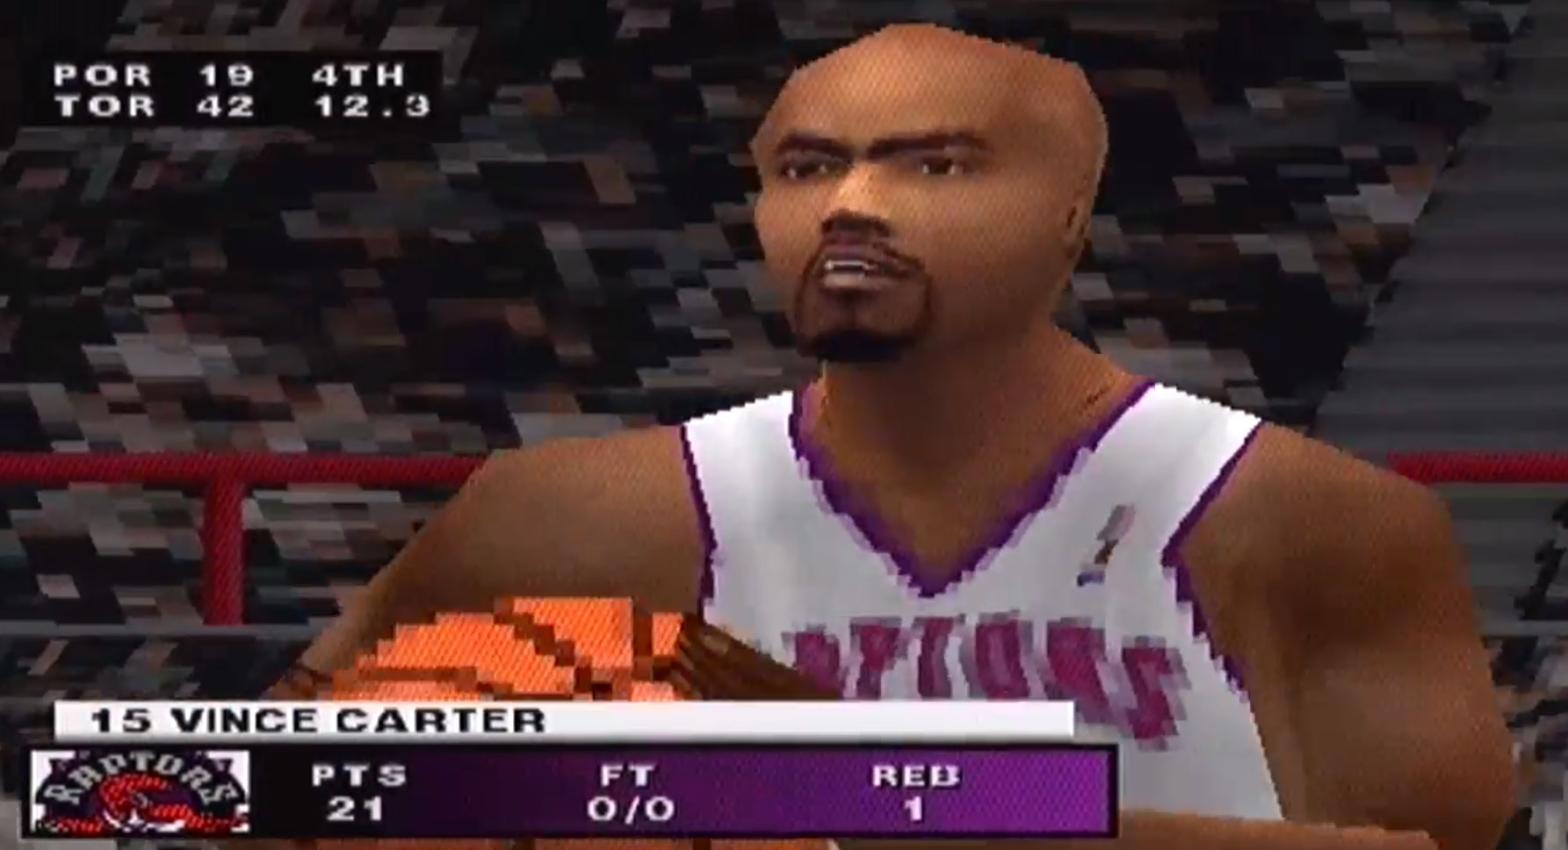 This is actually from the PS1 version of NBA Live 2000 since I couldn't find any footage or images of Carter on the N64.